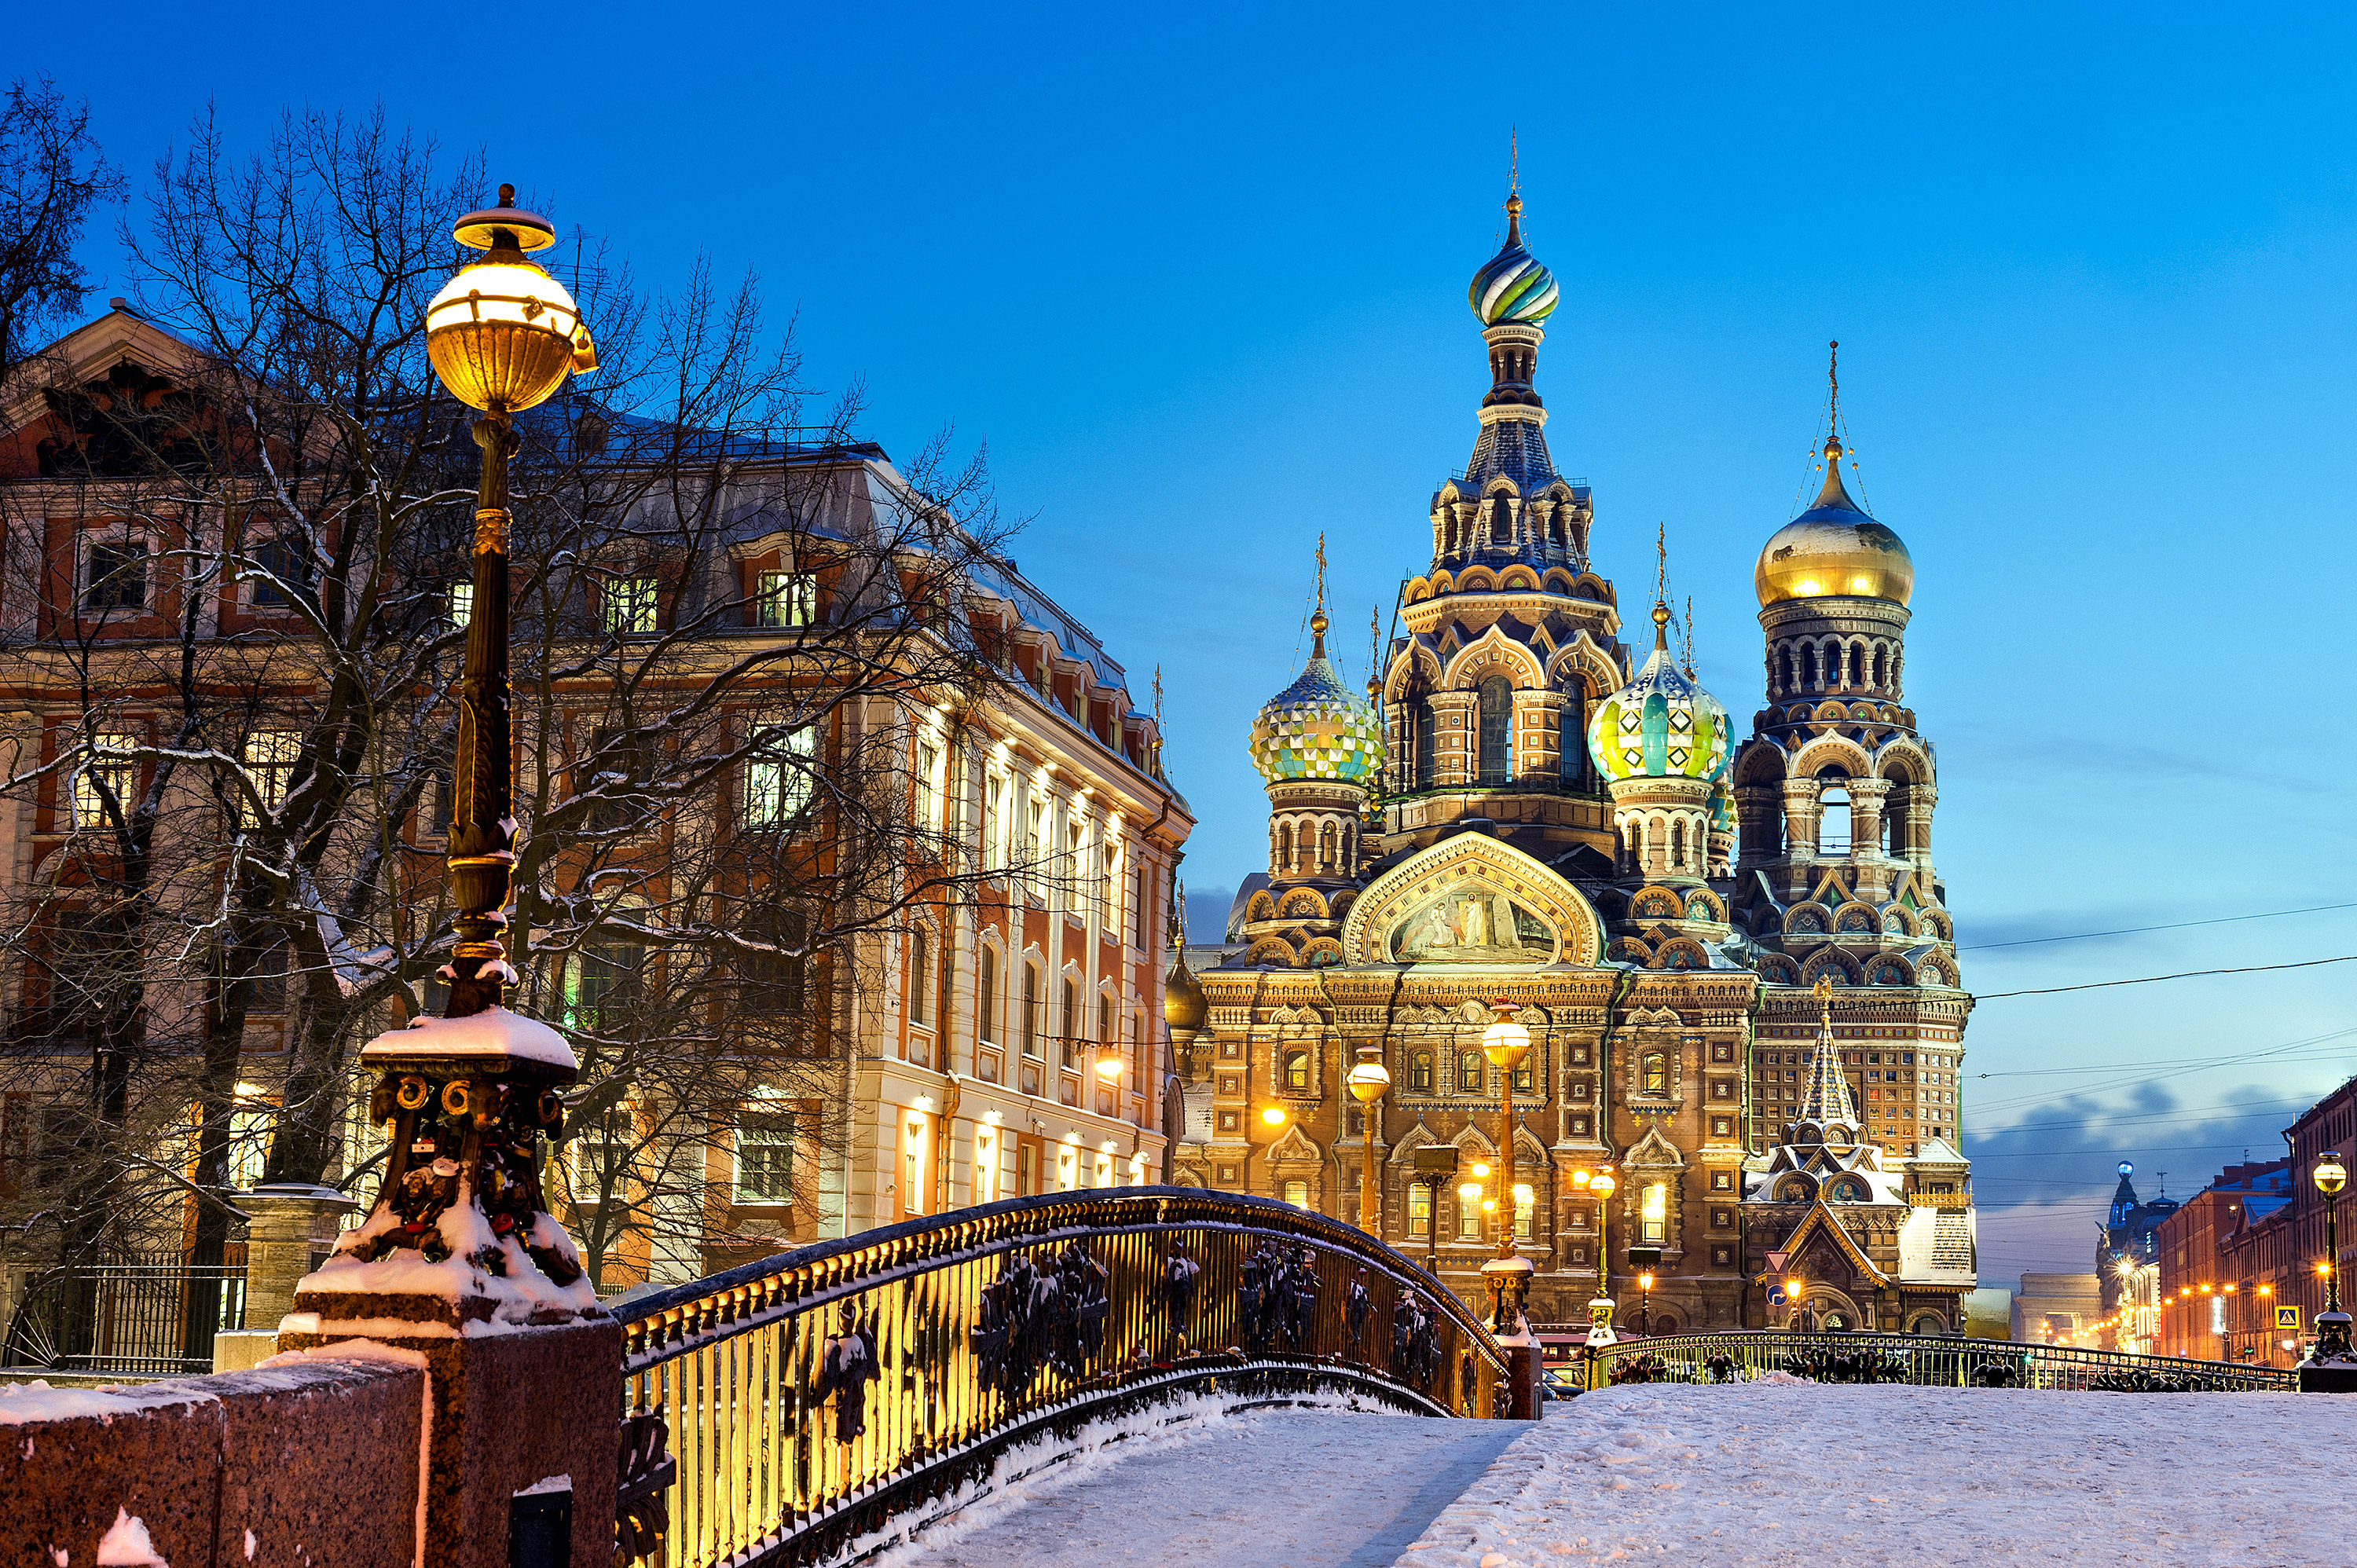 St. Petersburg, Russia: For the Wintery Ambiance